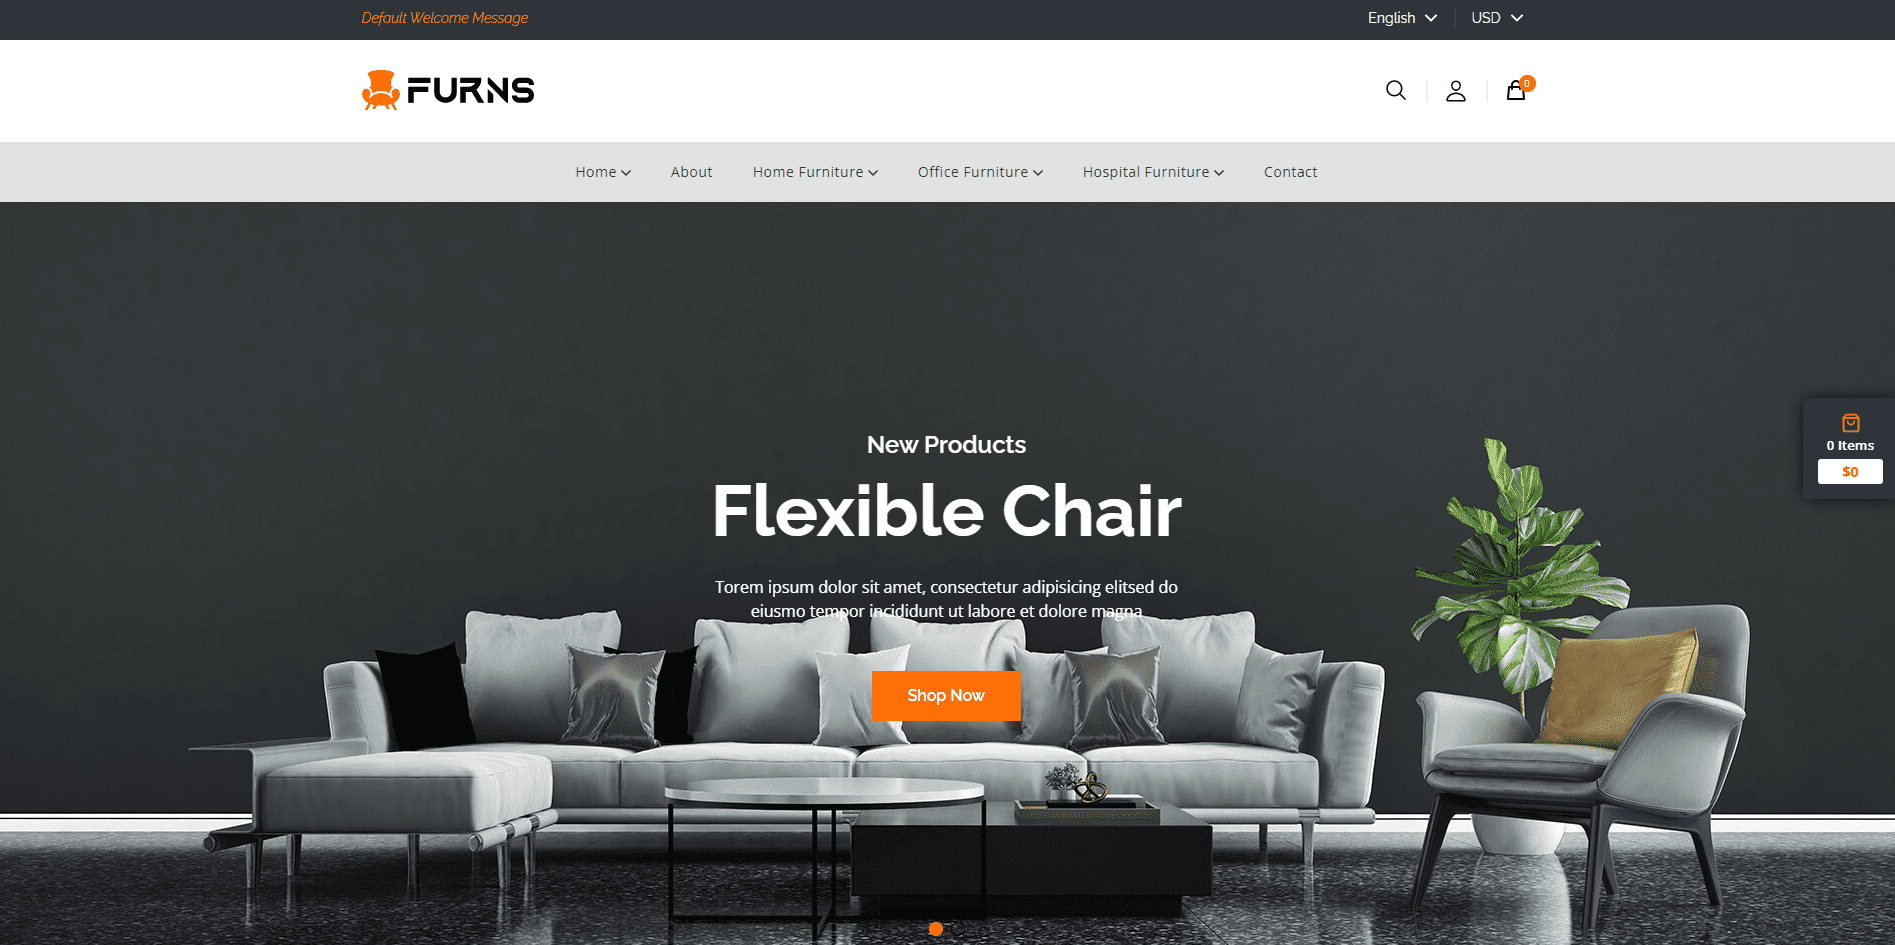 Furns - React eCommerce Template for Furniture Shop Website